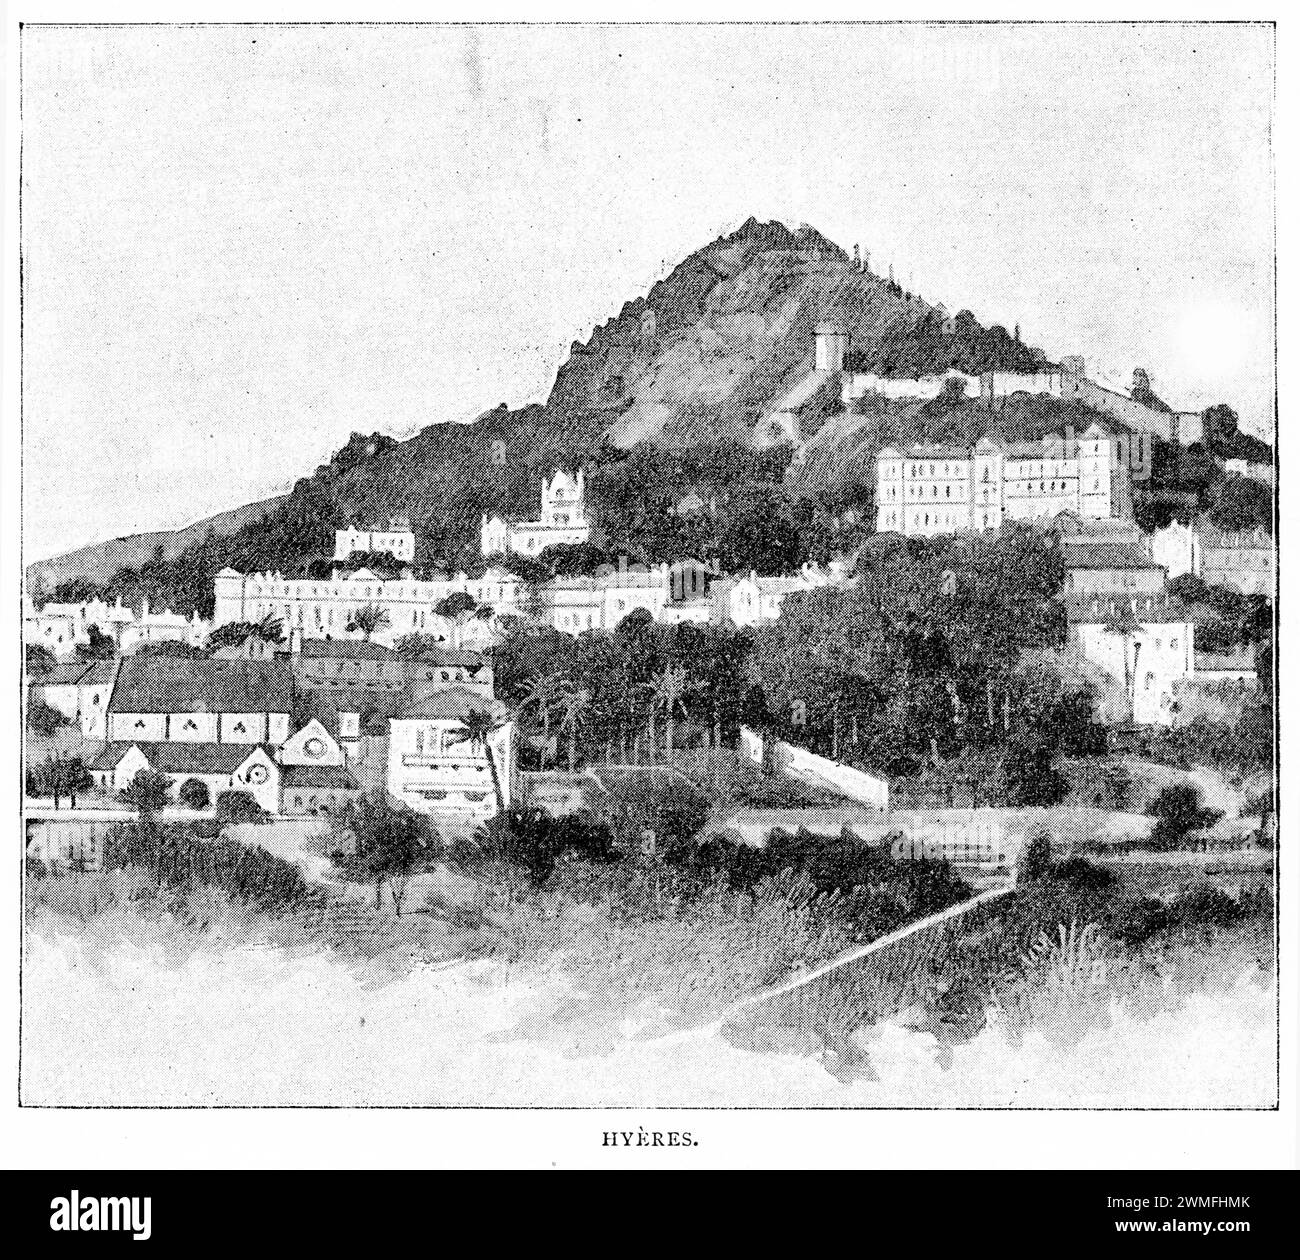 Halftone of Hyeres, circa 1900. Hyères is a French town on the Mediterranean coast. Its hillside old town features the remains of a medieval castle and centuries-old walls. Stock Photo